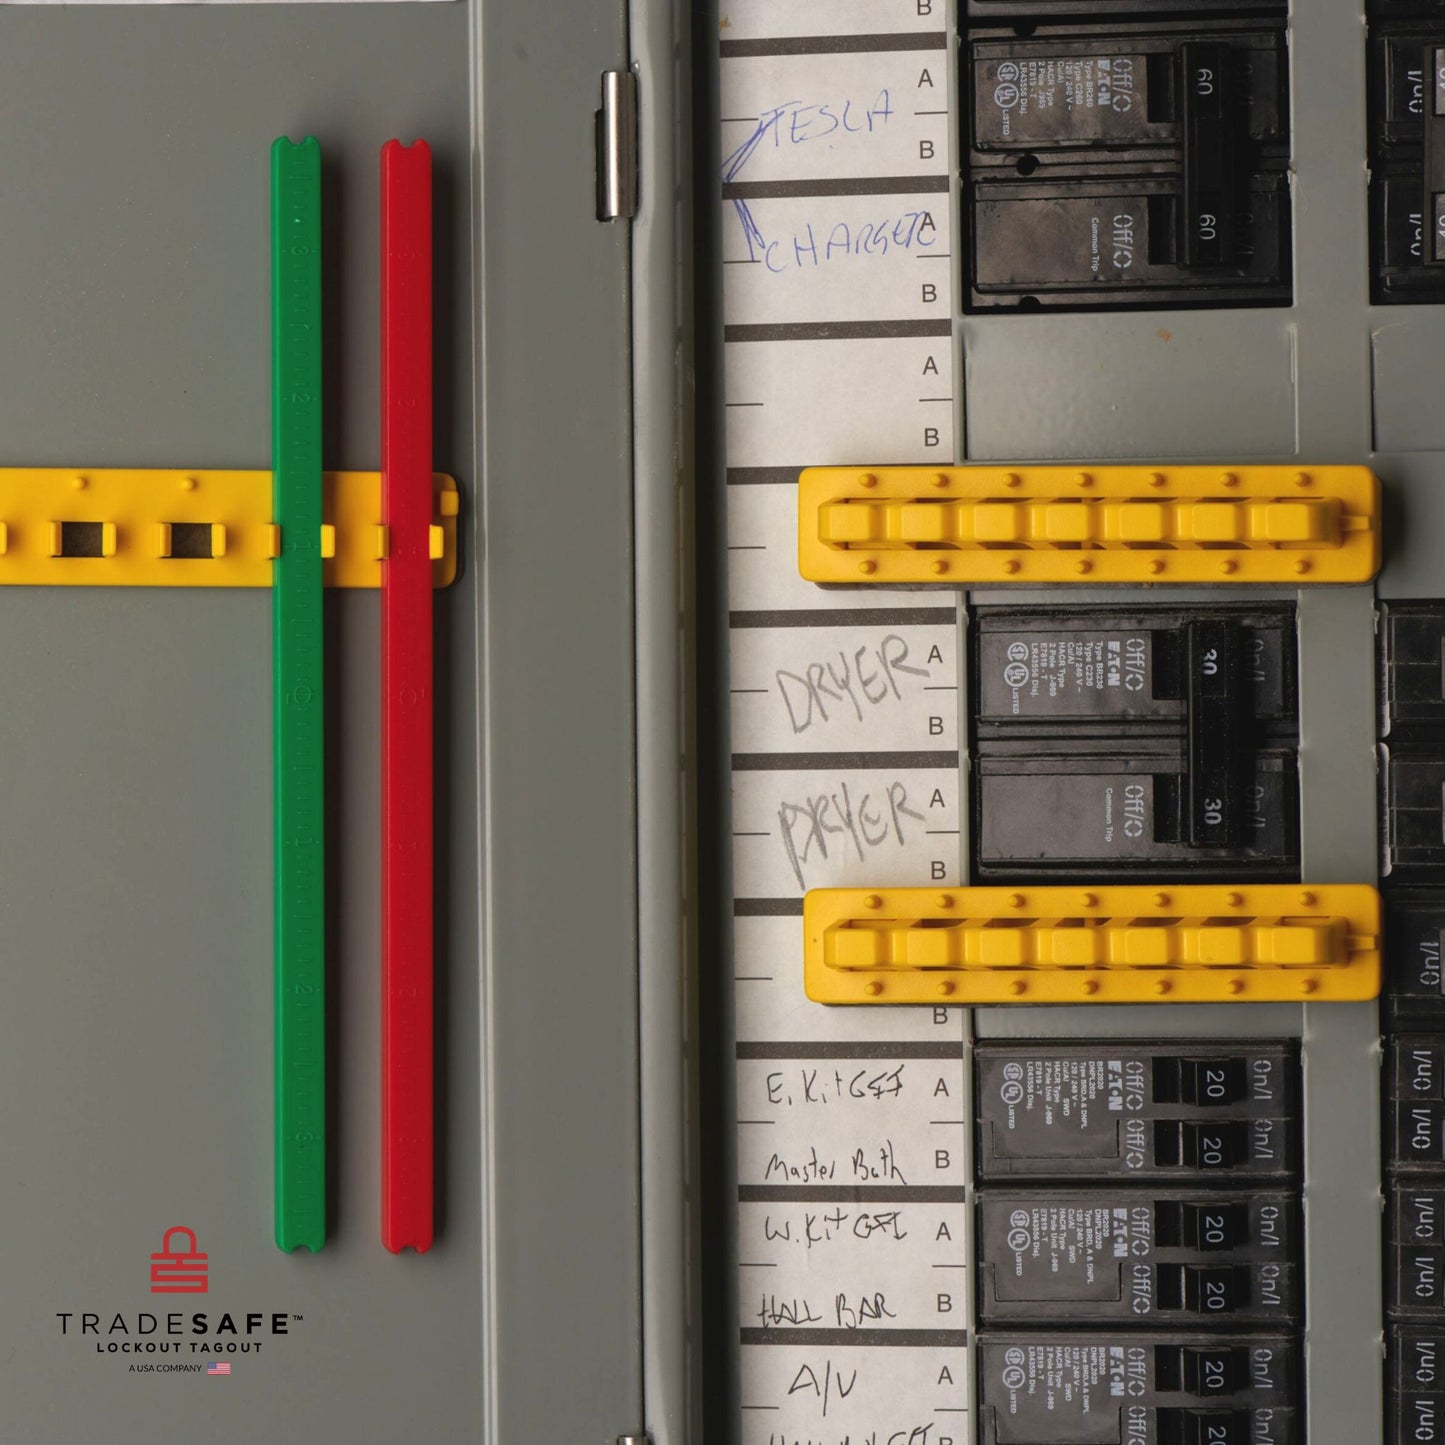 image of red and green circuit breaker blockers when not in use